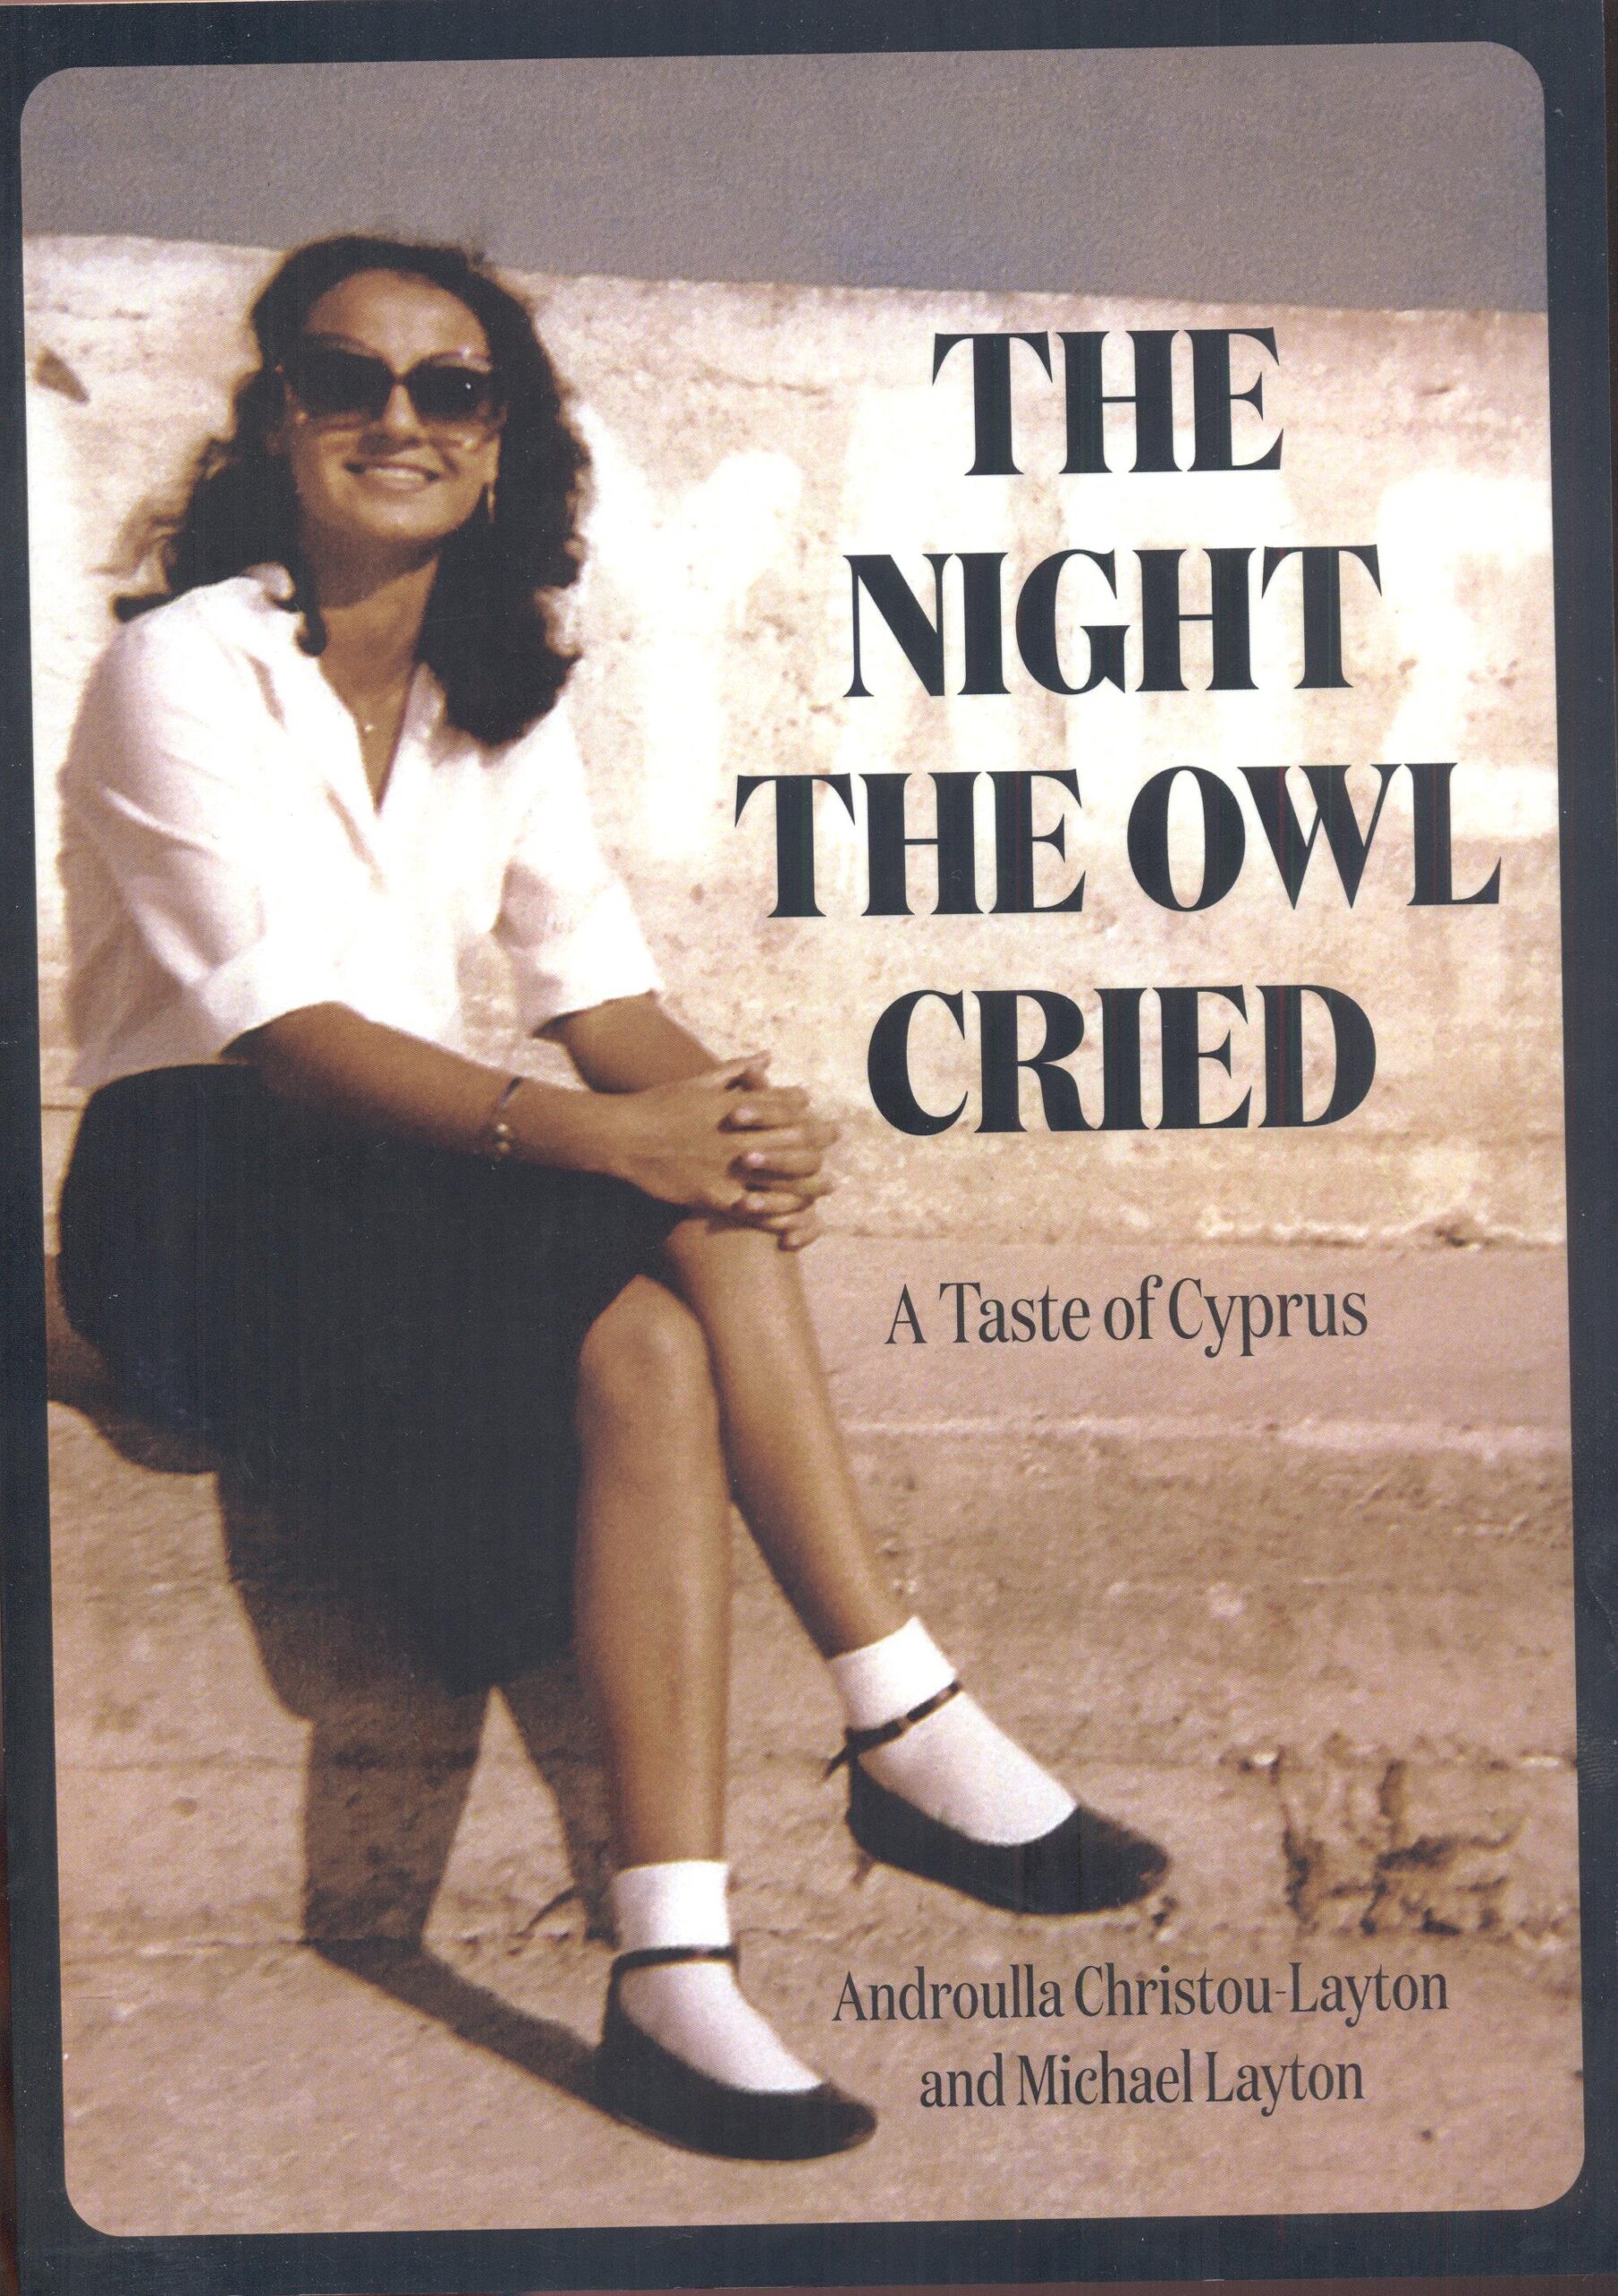 The Night The Owl Cried A Taste of Cyprus